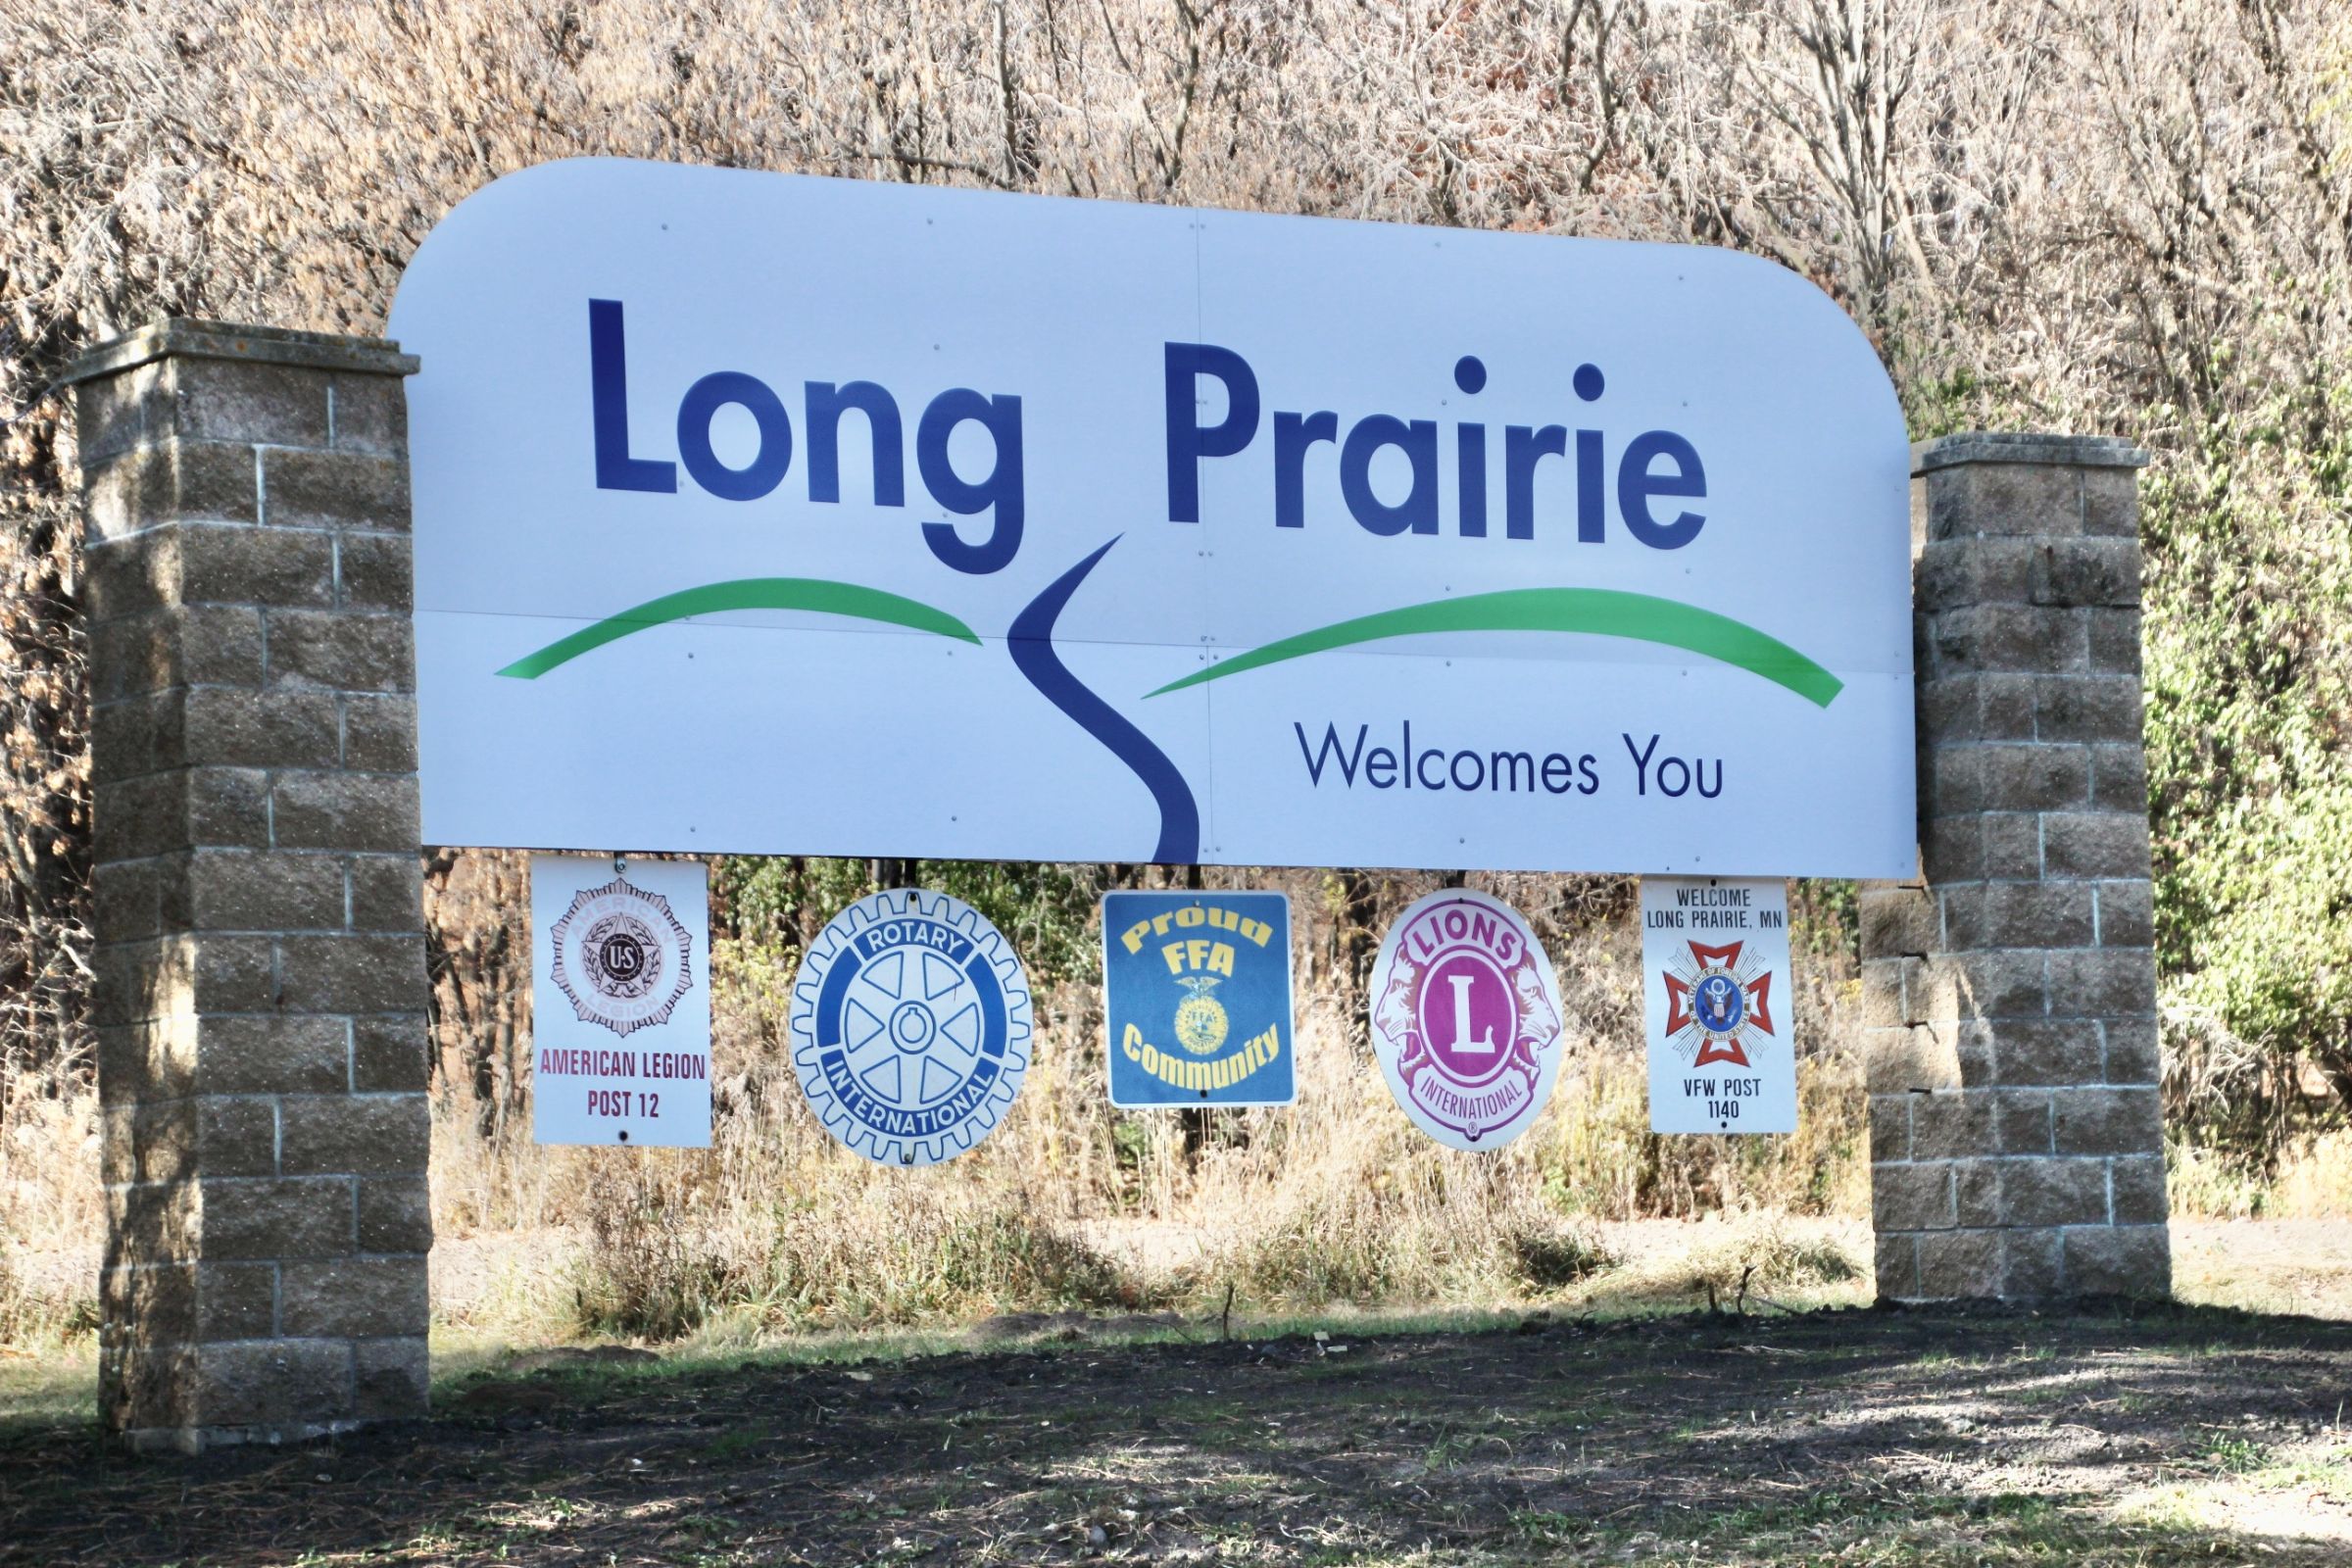 Beautification efforts to transform the city of long prairie Article Photo